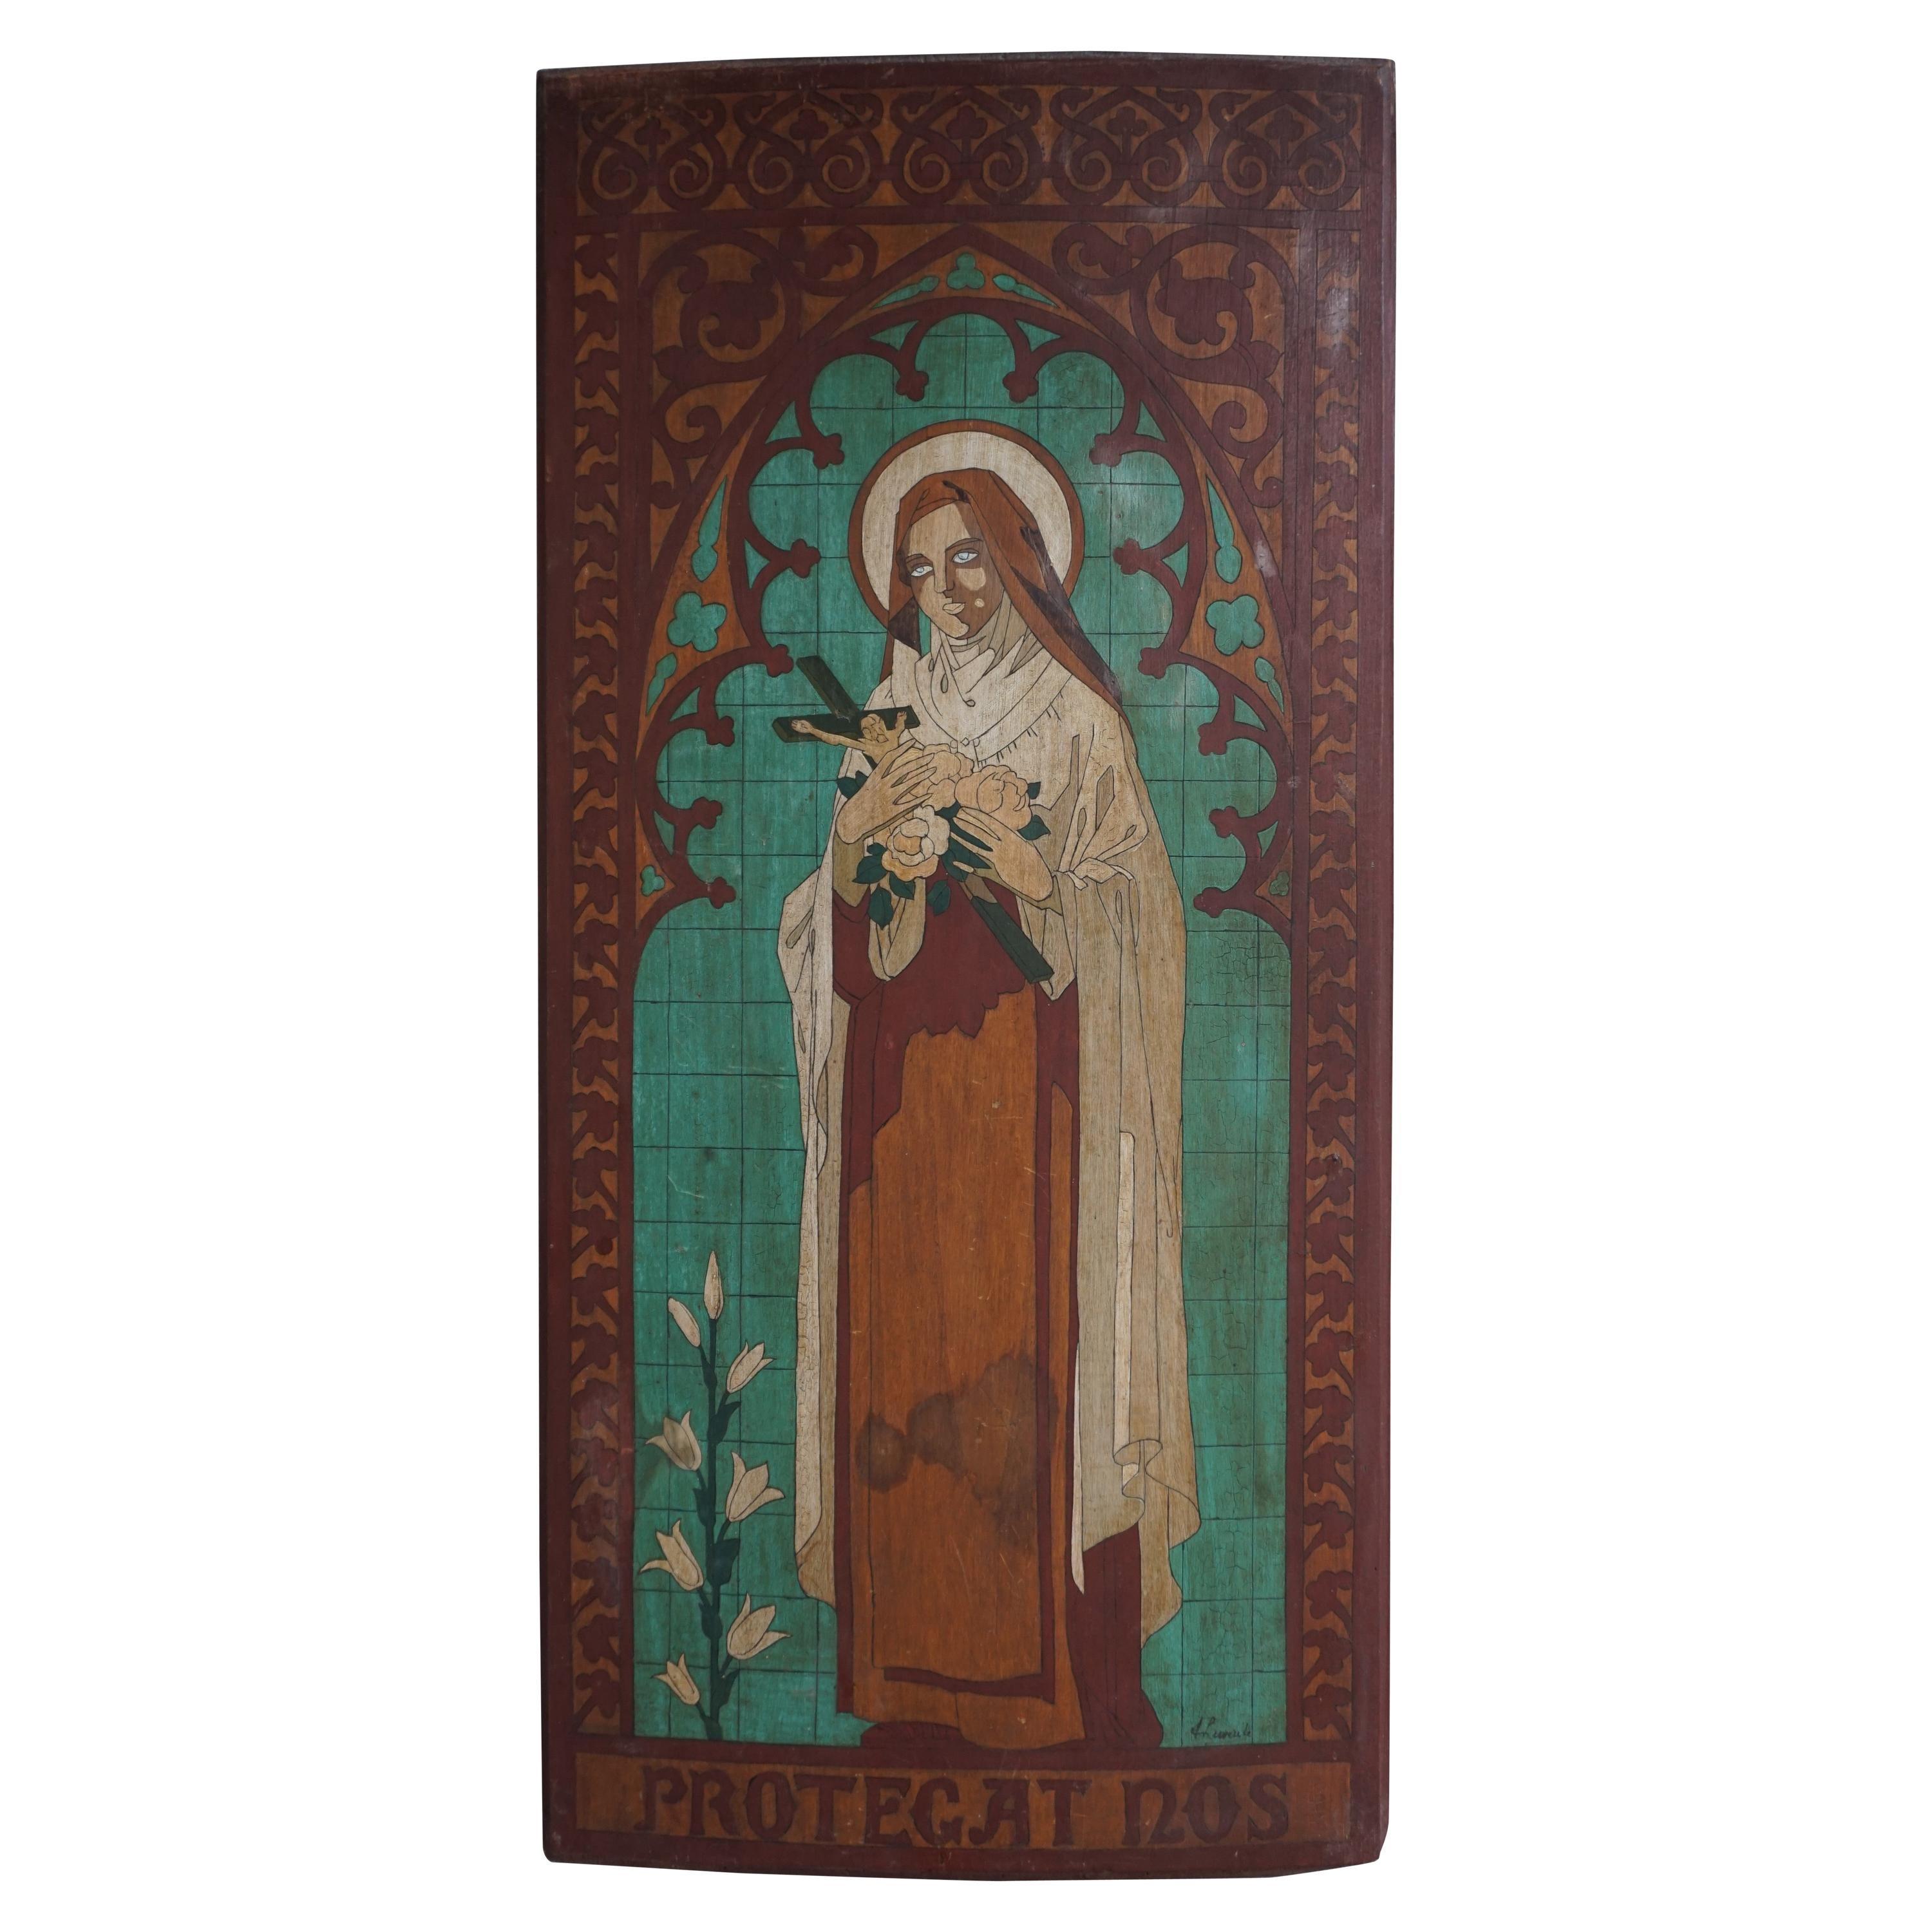 Antique Hand Painted Gothic Revival Wall Panel of Saint Theresia of Lisieux